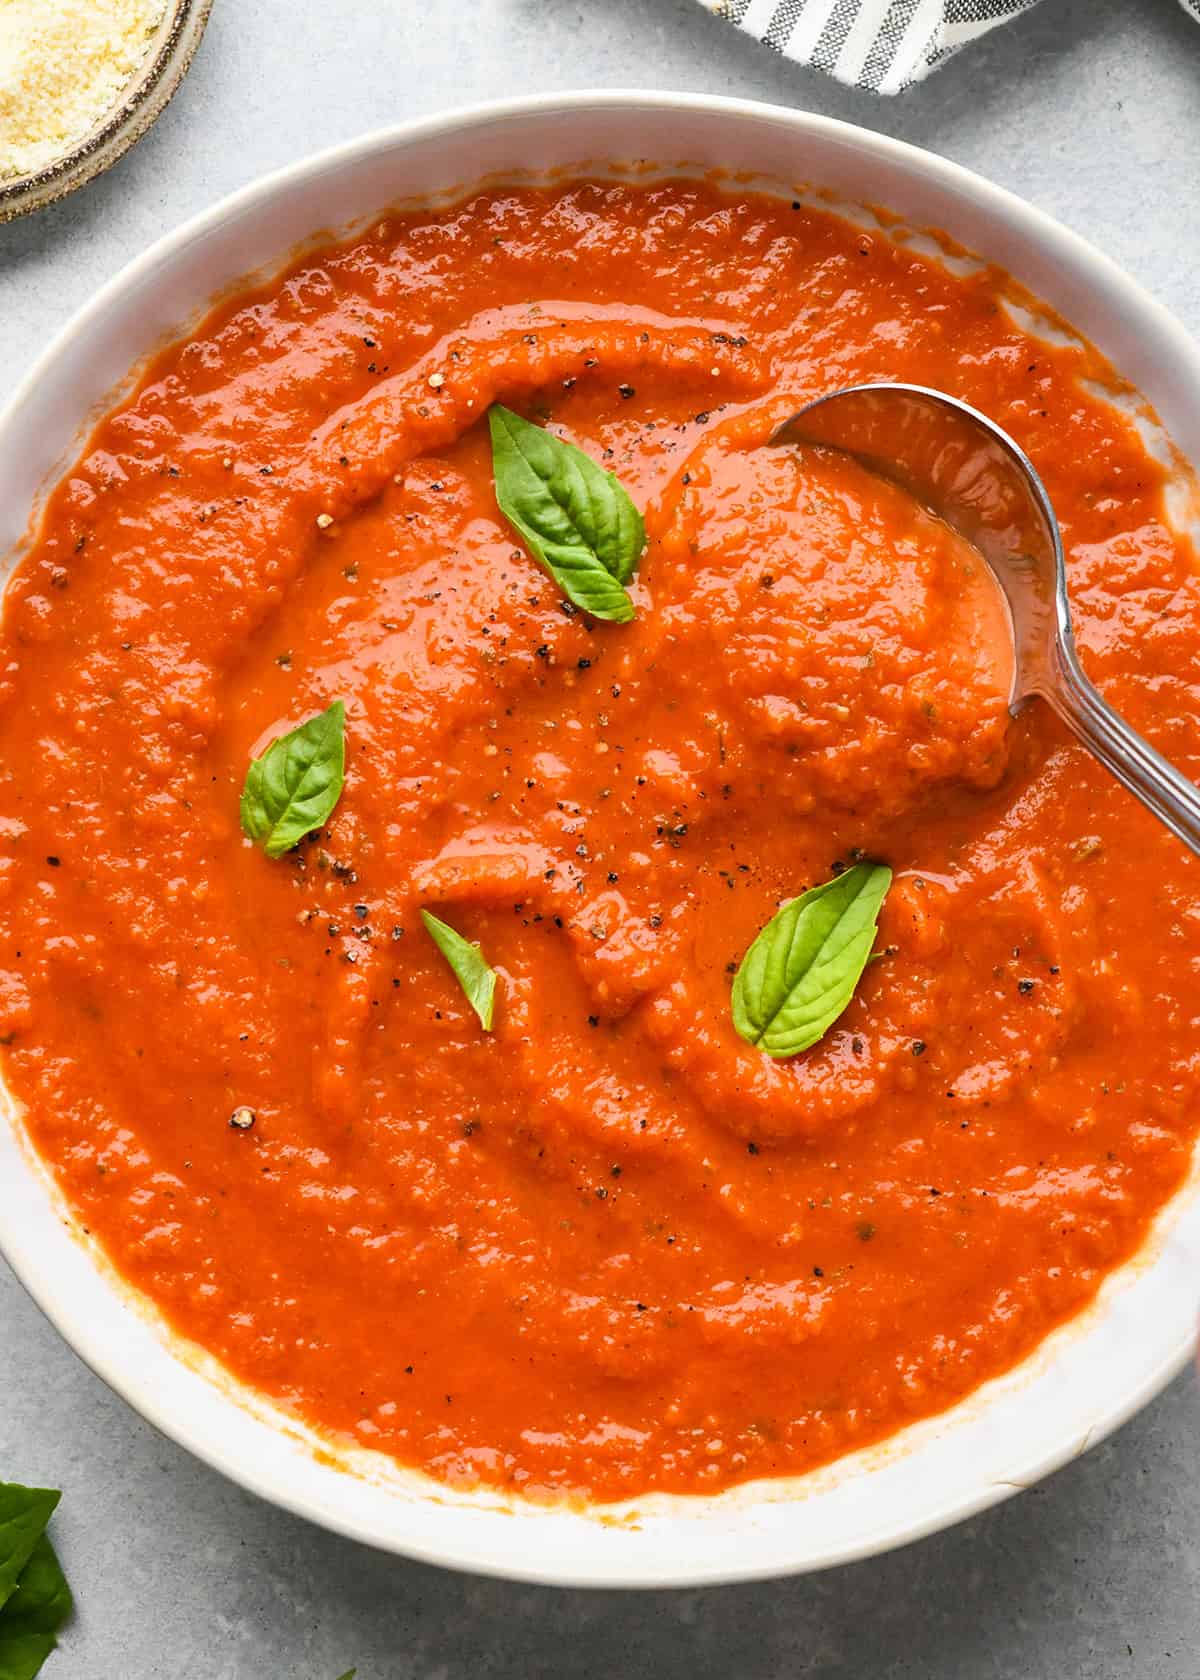 Marinara Sauce Recipe in a bowl with a spoon, garnished with basil